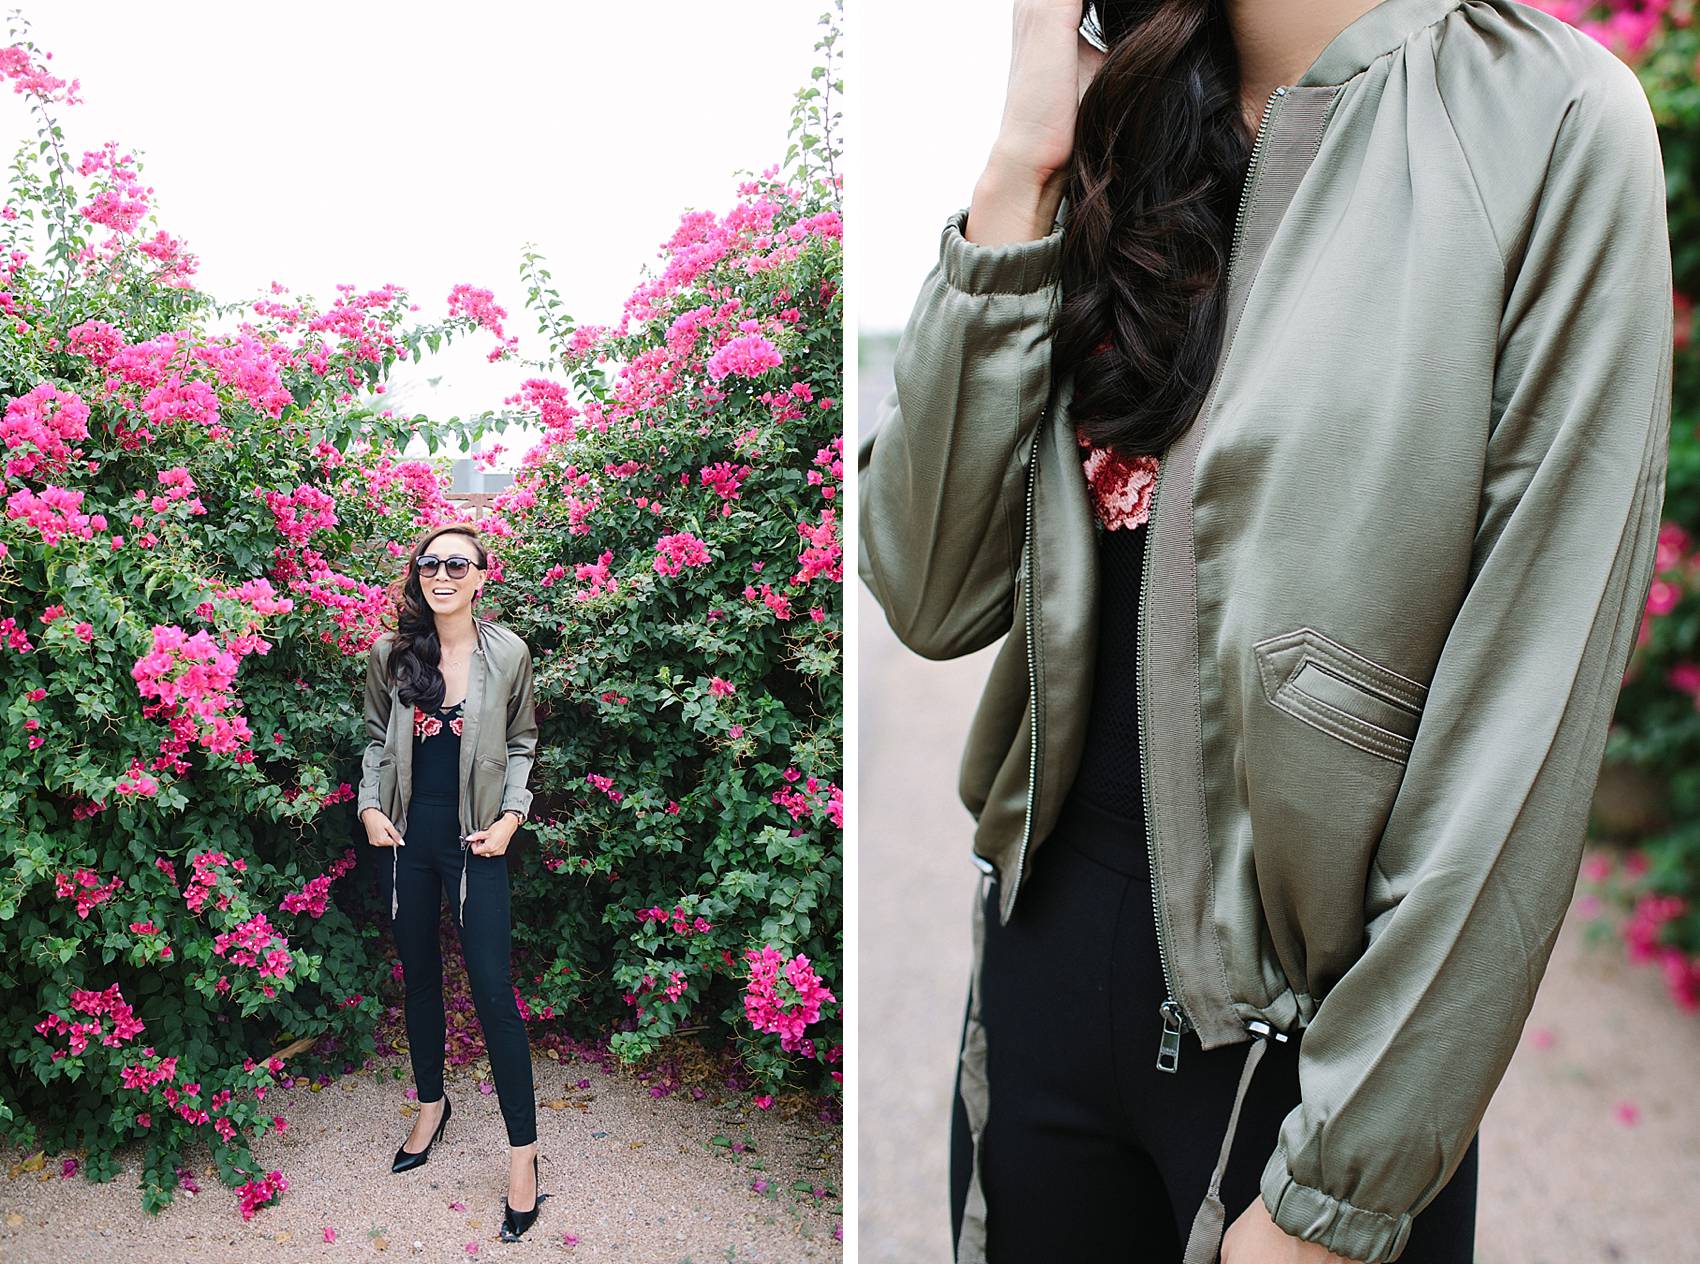 diana elizabeth lifestyle blogger in black devon-fit bi-stretch leggings and satin bomber jacket by banana republic standing in front of pink bougevvilla plants 